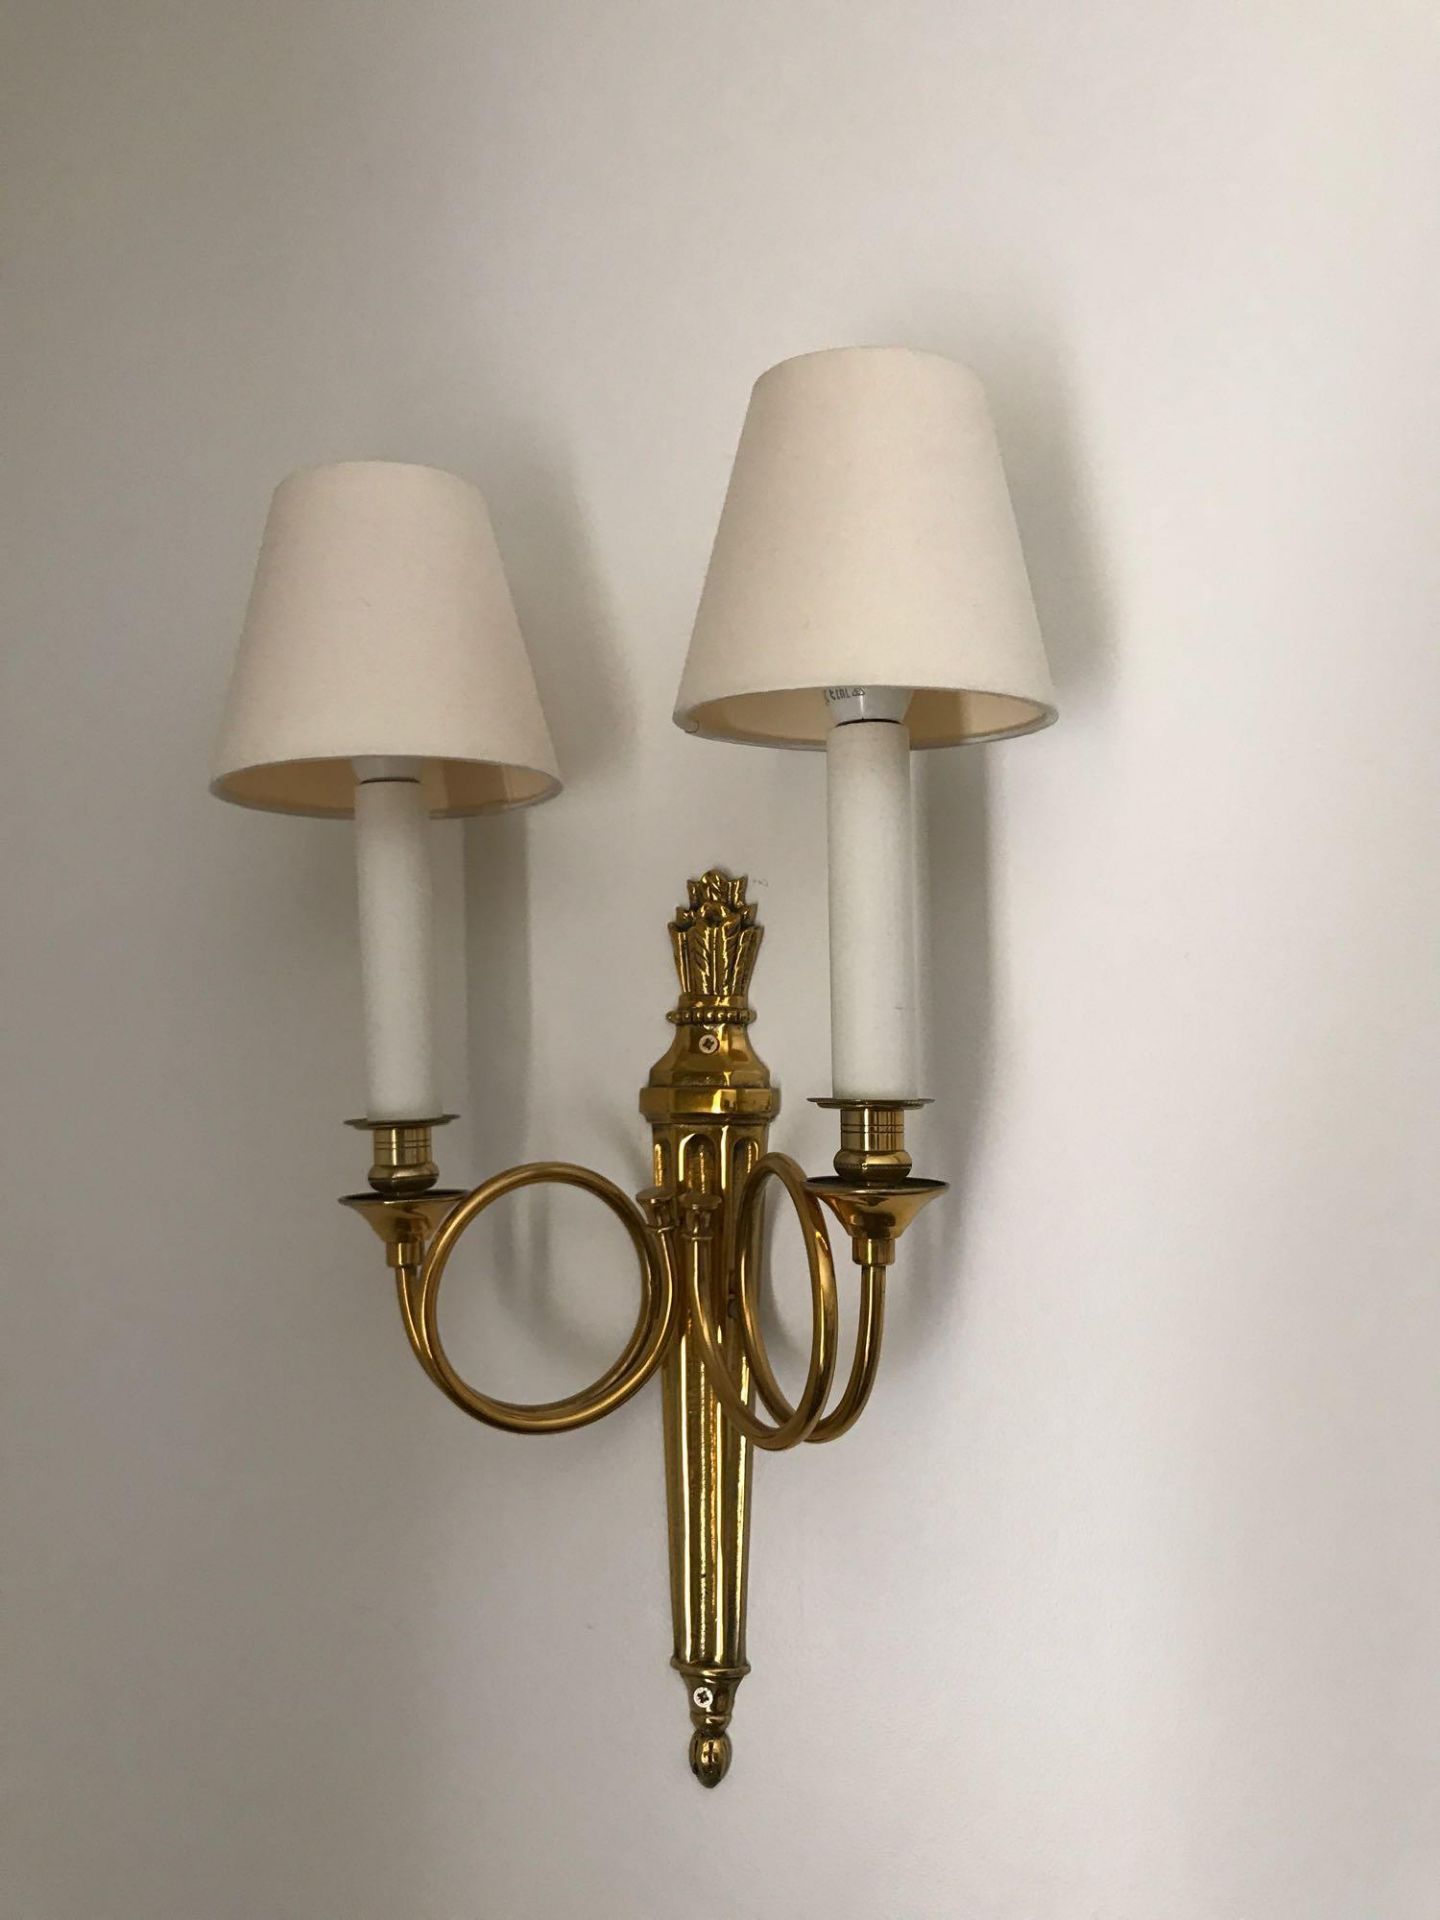 A Pair Of Dore Bronze Dore Twin Arm Wall Sconces, The Scrolling Arms With Trumpet Bobeche Drip